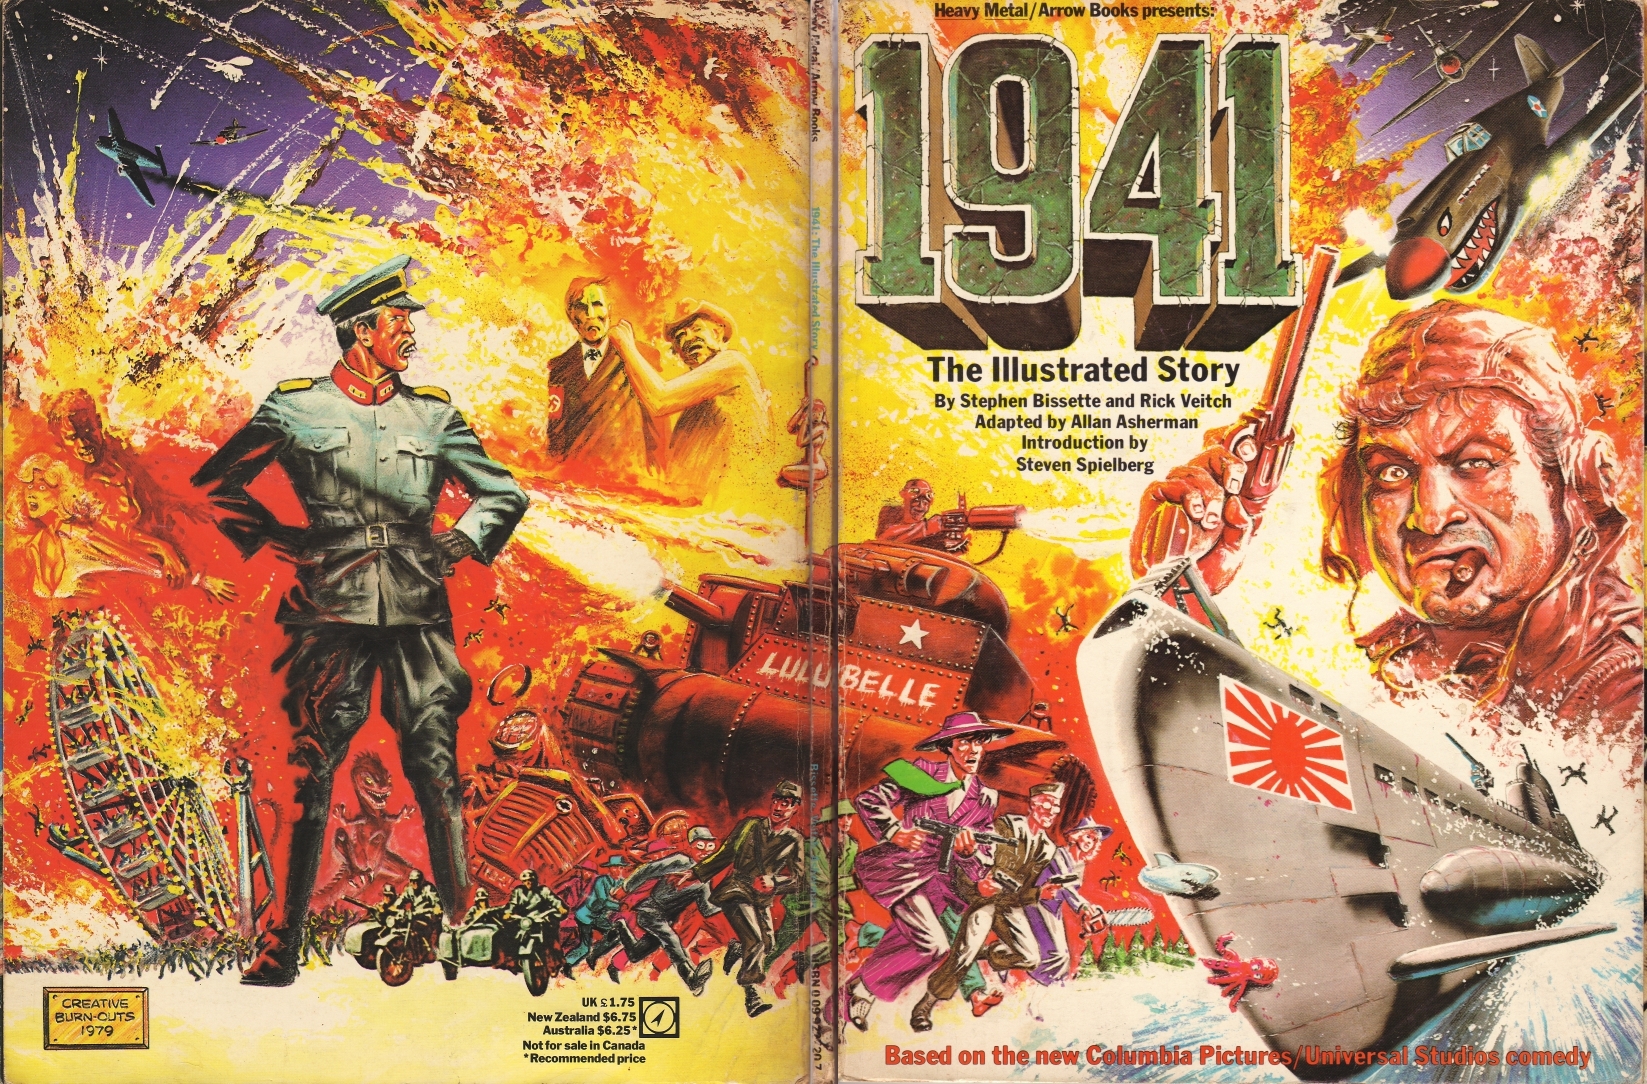 1941: The Illustrated Story (December
1979)